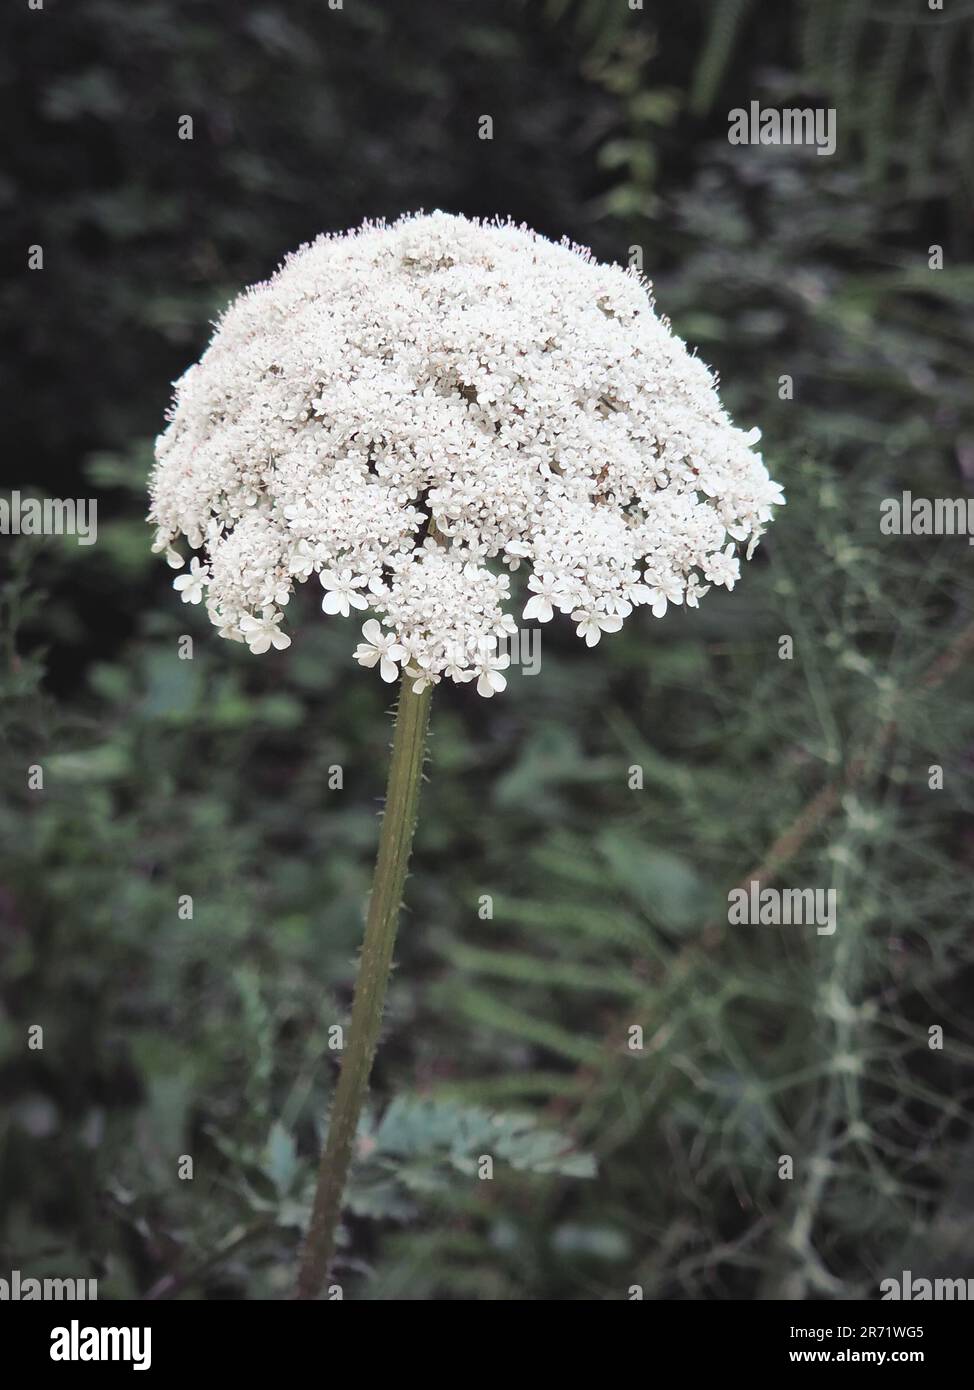 One wild carrot plant growing in a forest in Portugal with blurred background. Close-up shot. Daucus carota is a flowering plant in the family Apiacea Stock Photo